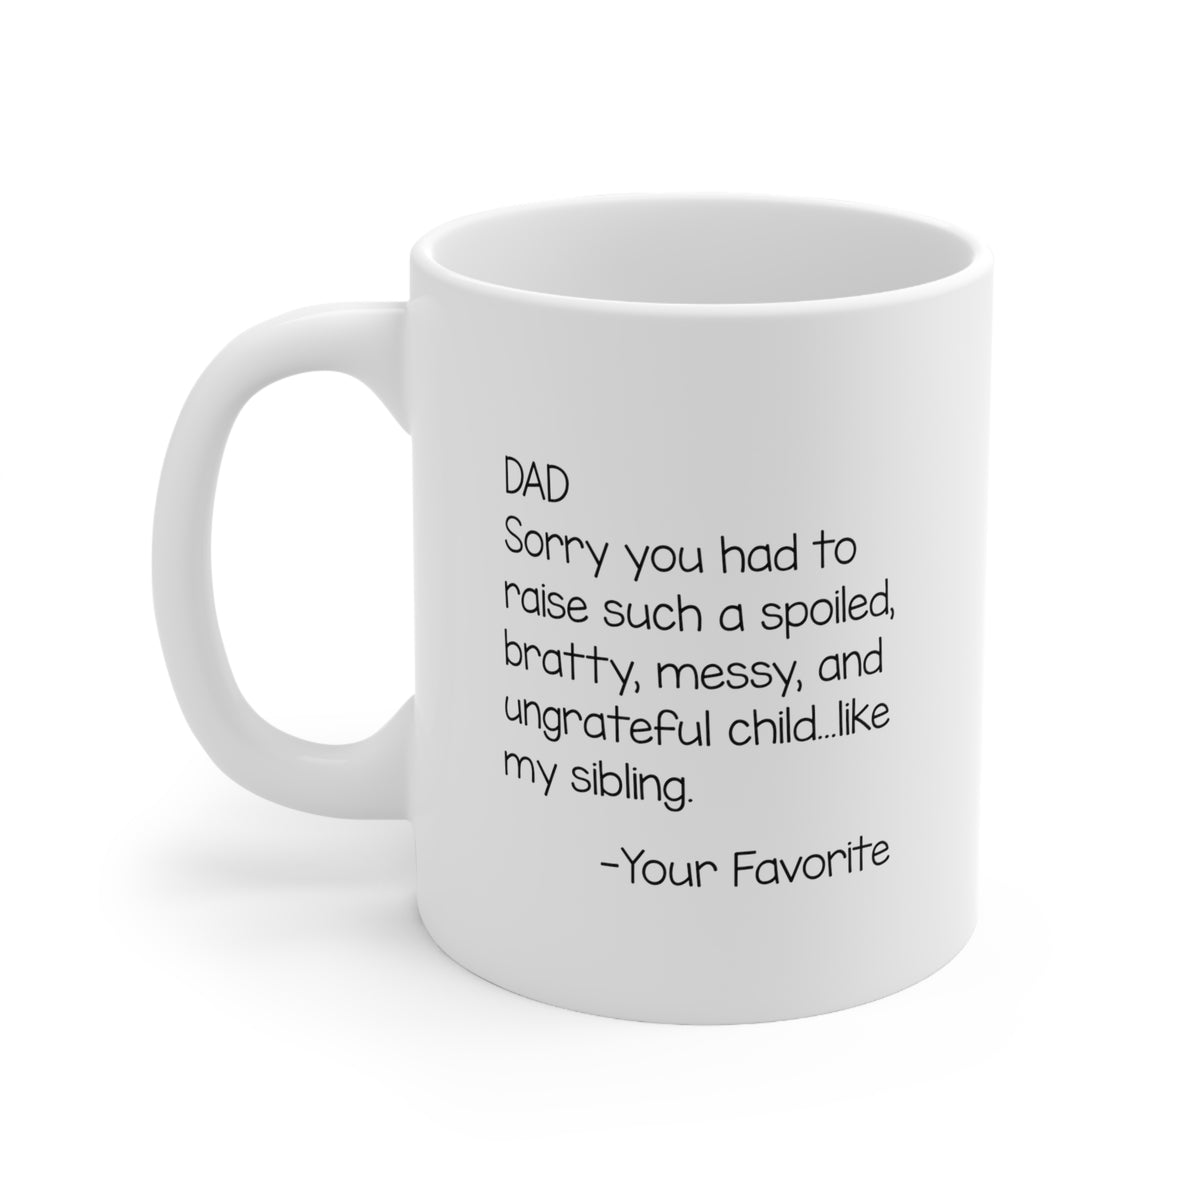 Father's Day Coffee Mug - Sorry you had to raise my sibling - Funny Novelty Gift Idea for Dad